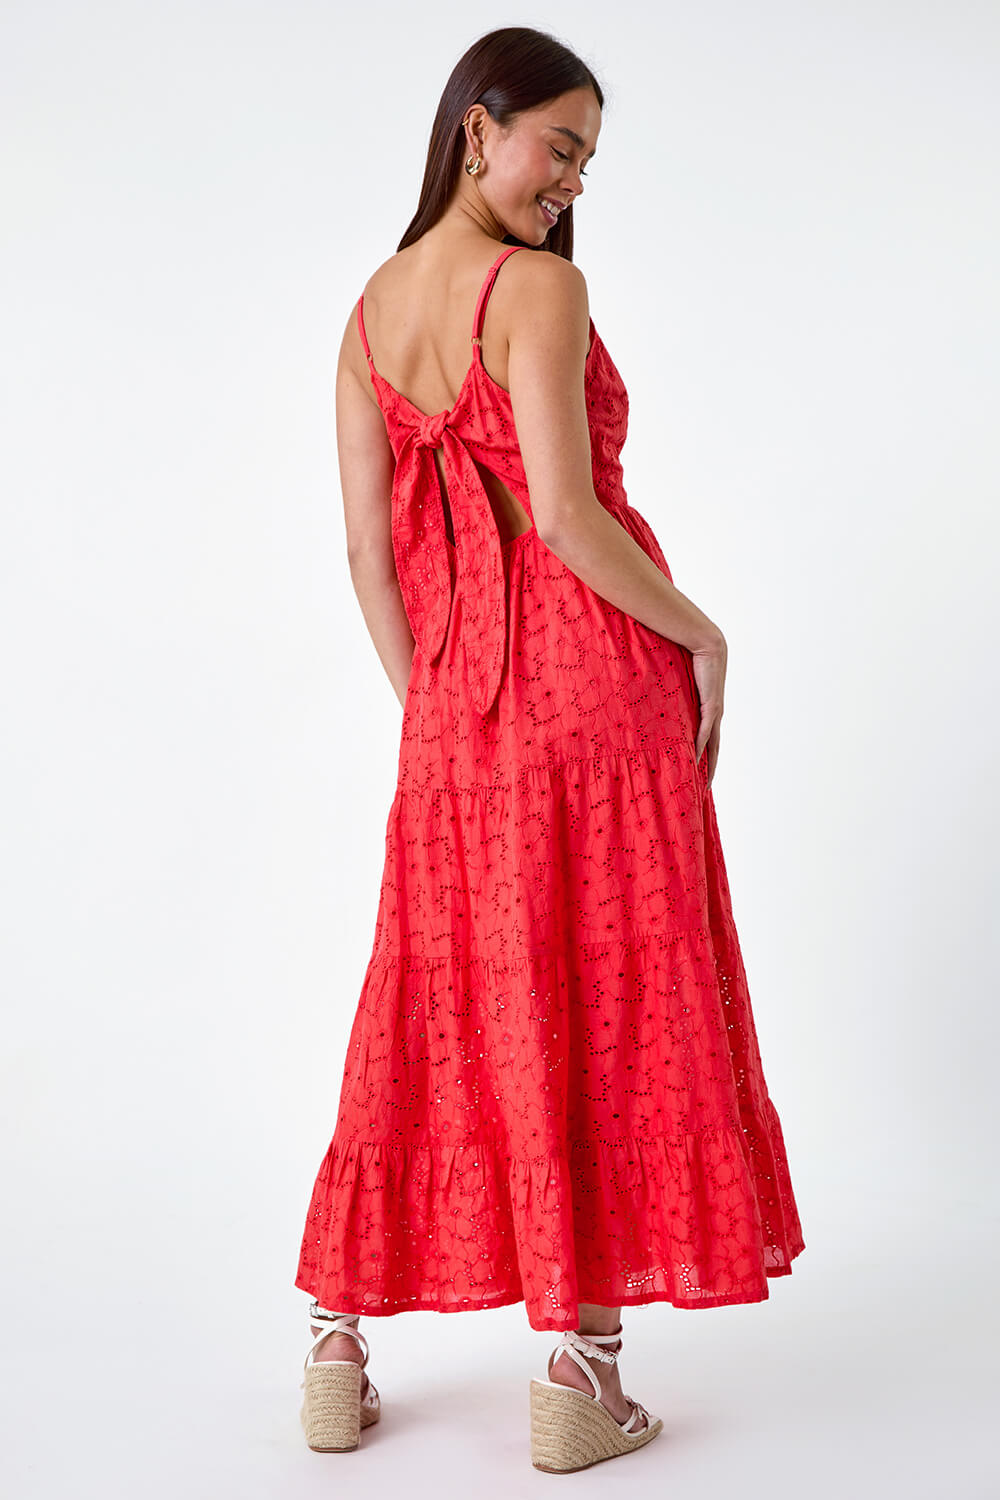 CORAL Petite Tie Detail Broderie Dress, Image 3 of 5